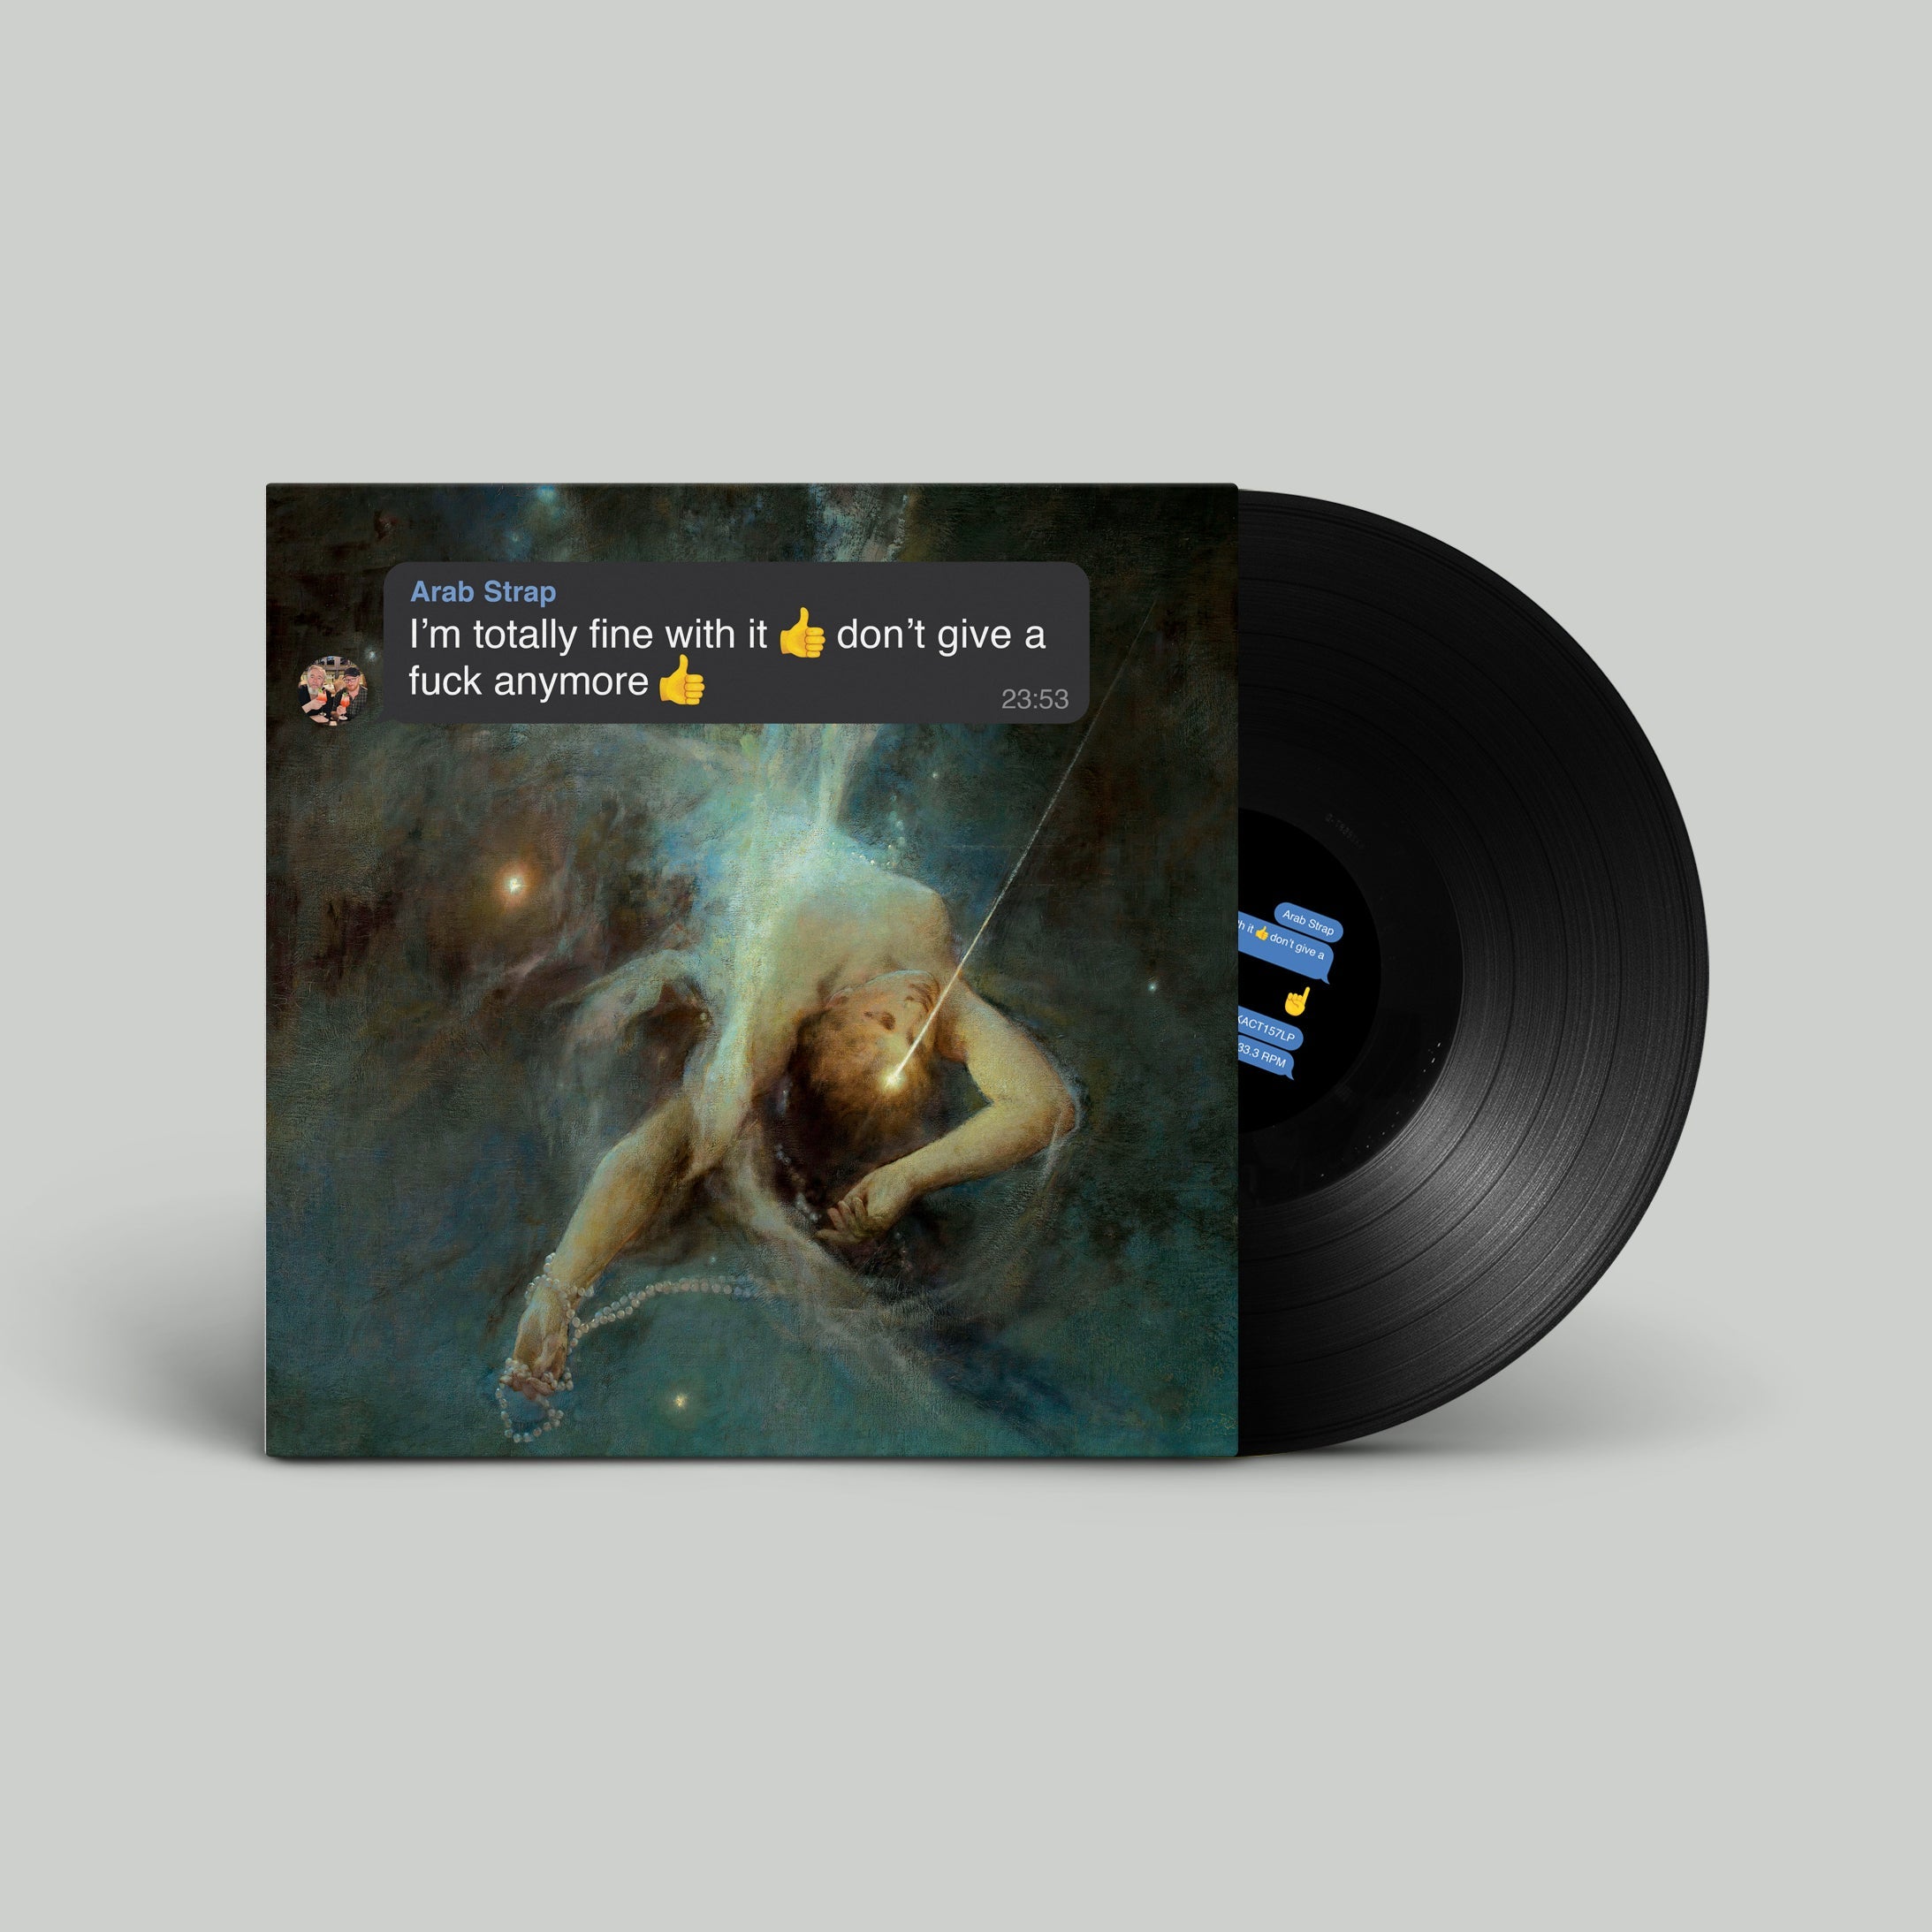 I’m totally fine with it 👍don’t give a fuck anymore 👍: Vinyl LP & Signed Print [Limited Copies]